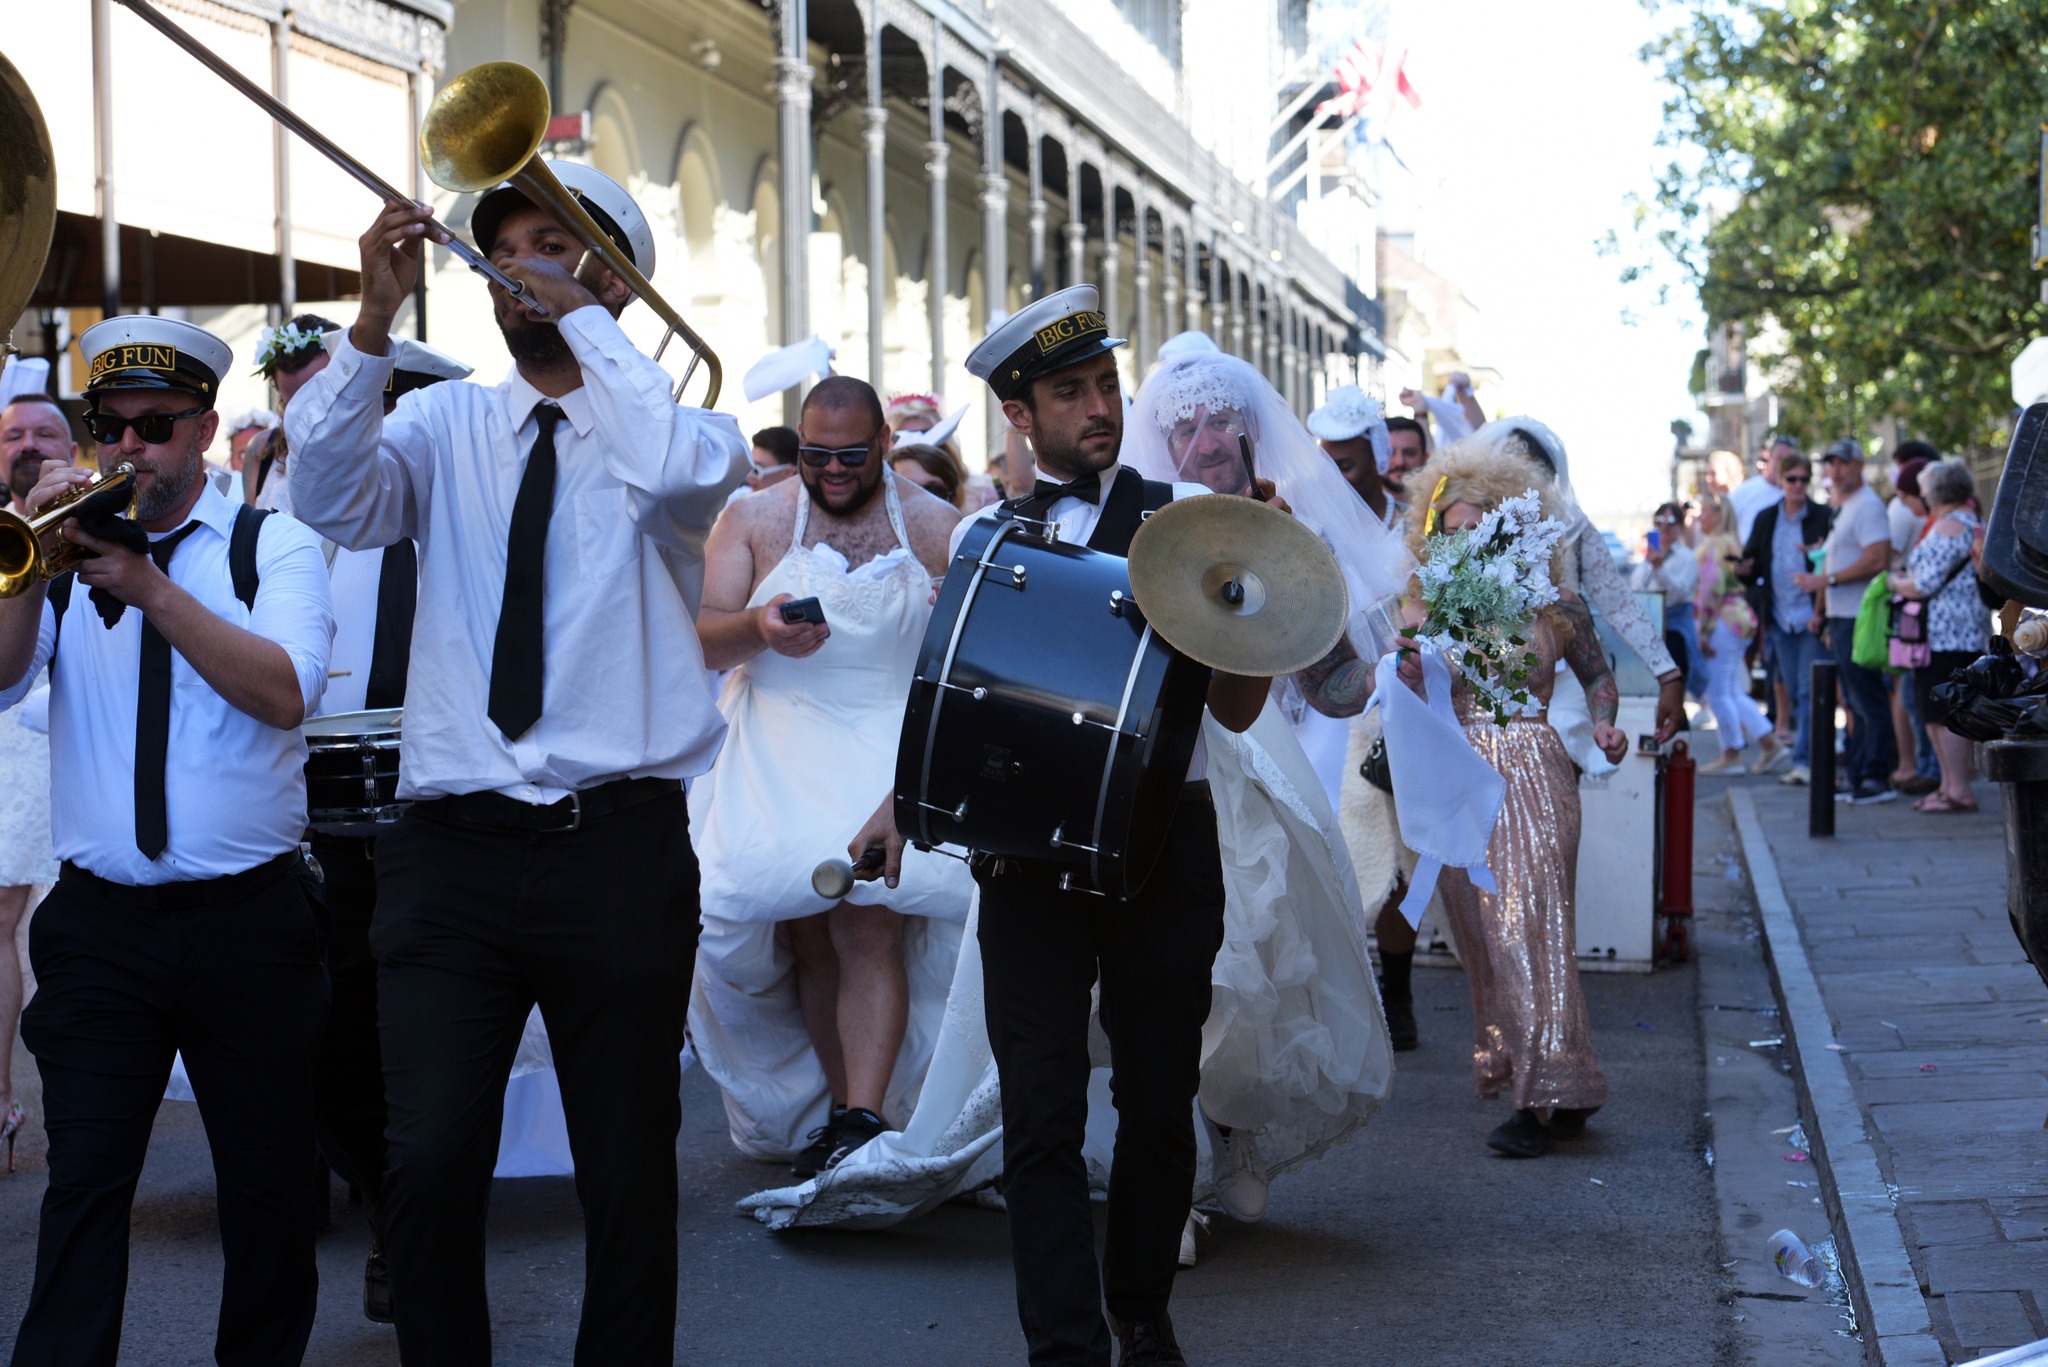 This image shows a brass band leading a group of people dressed as brides